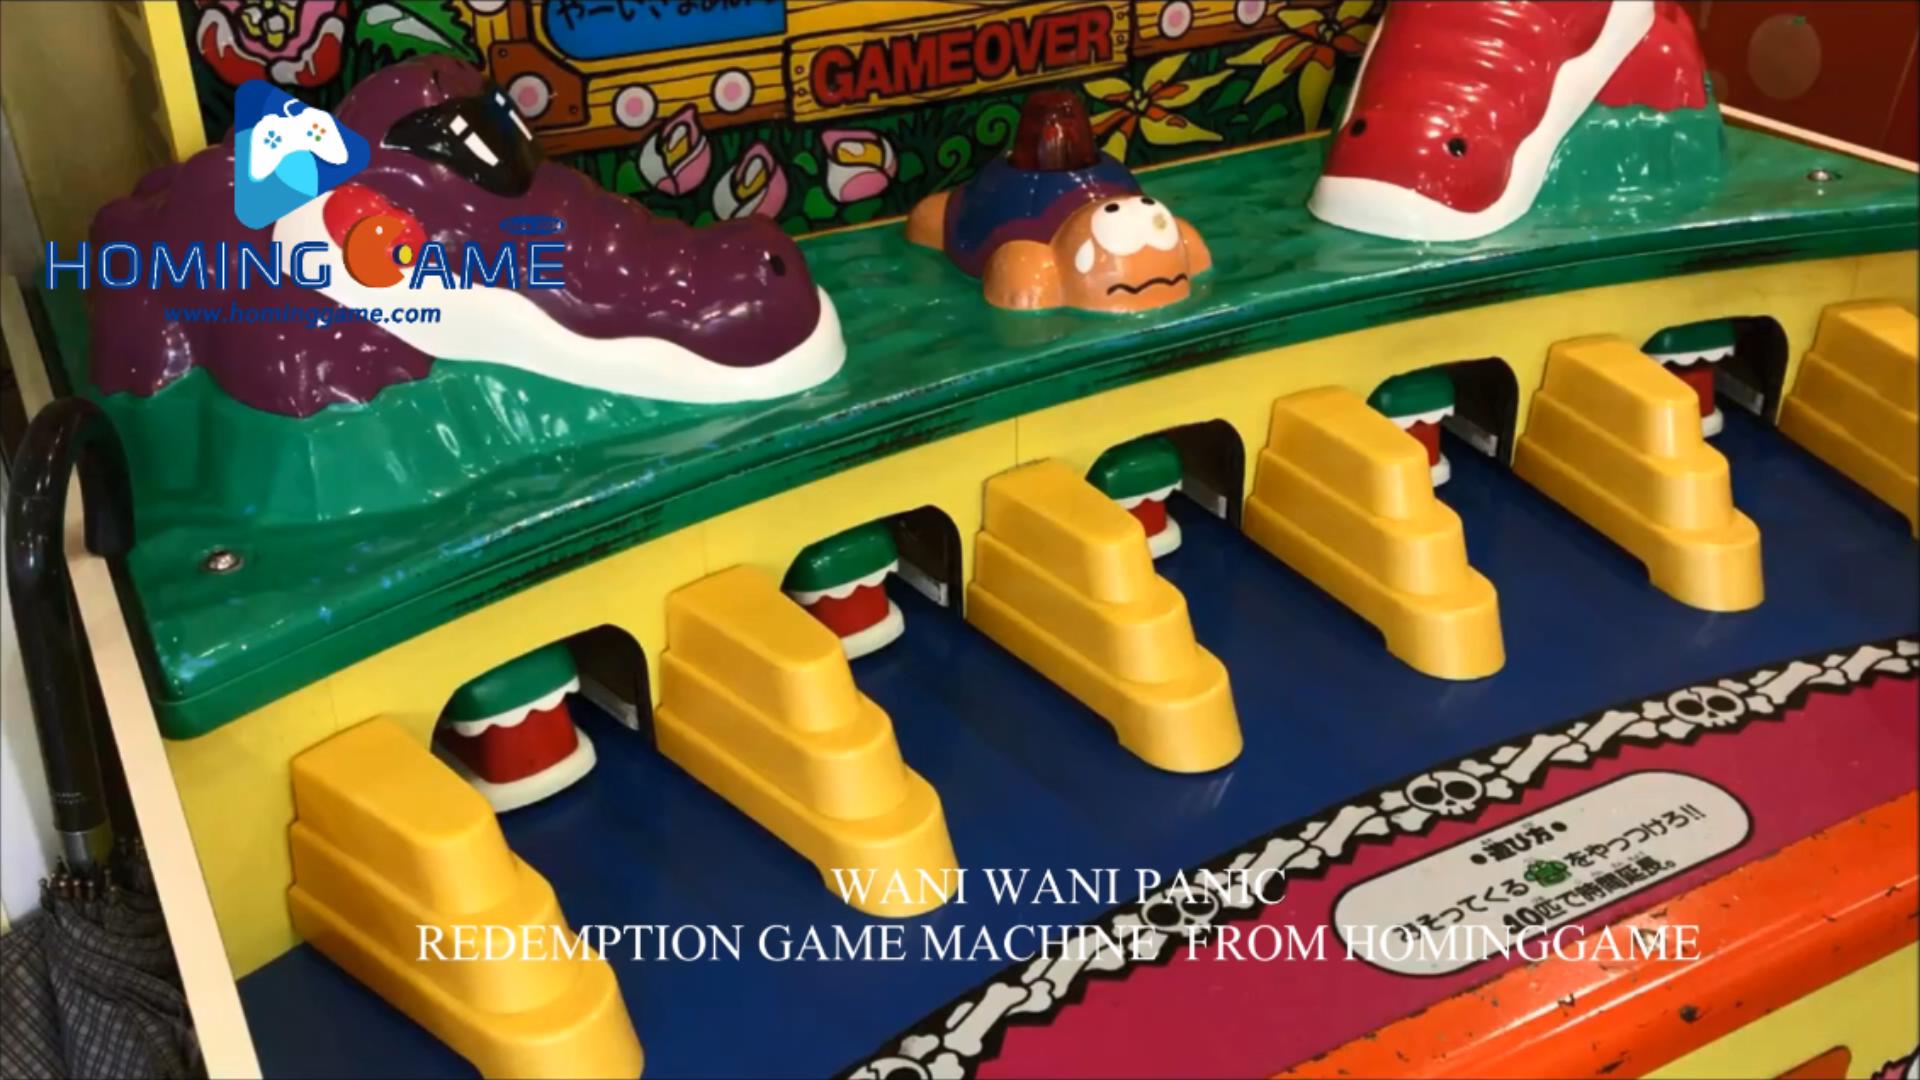 2020 Take Your Kids come to Kids Game center to paly HomingGame Classic Coin Operated Whacky Wani Wani Pani Redemption Game Machine Hit Crocodile Game(Order Call Whatsapp:+8618688409495),Whacky Wani Wani Panic,wanic wanic panic arcade game machine,whacky wani wani panic redemption game machine,hit crocodile arcade game machine,hit hammer arcade game machine,game machine,coin operated game machine,indoor game machine,electircal game machine,amusement park game equipment,hominggame,www.gametube.hk,indoor game machine,family entertainment game machine,entertainment game machine,amusement machine,redemption game machine,lottery game machine